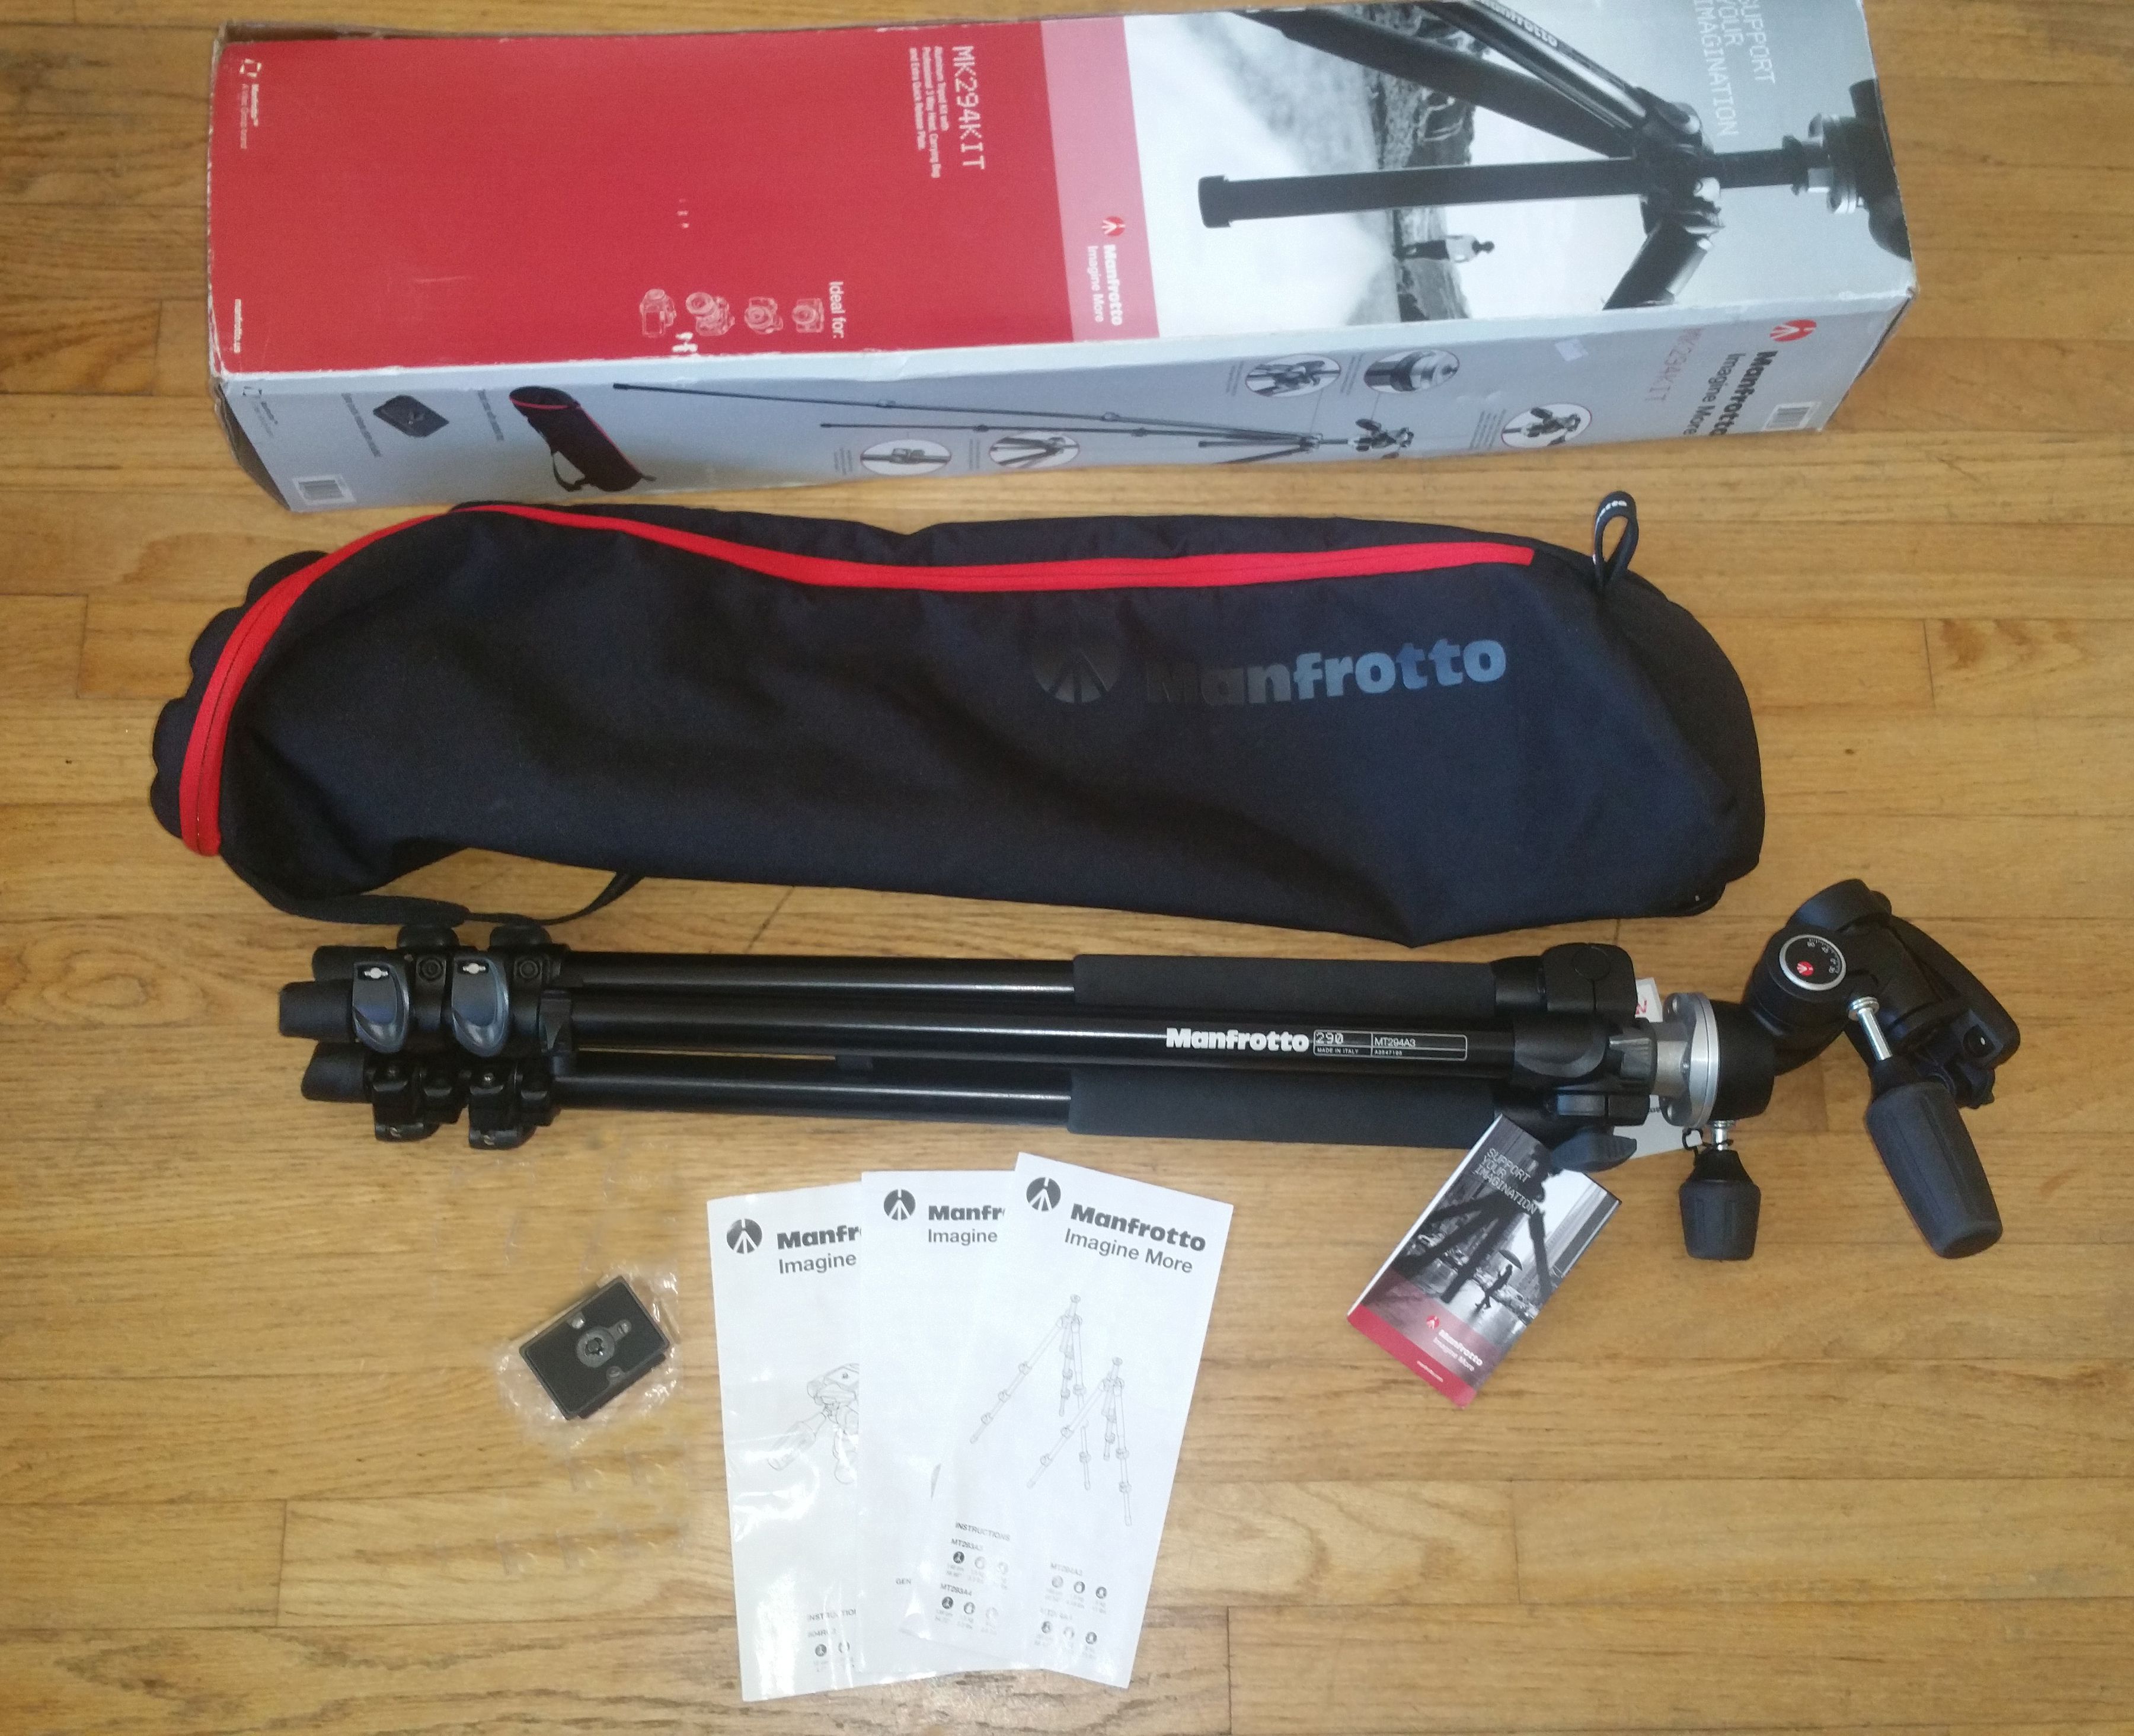 Manfrotto Bogen MK294KIT Professional Tripod. 3-Way Head, Carrying Case, 2 Quick Release Plates. Price Is Firm.